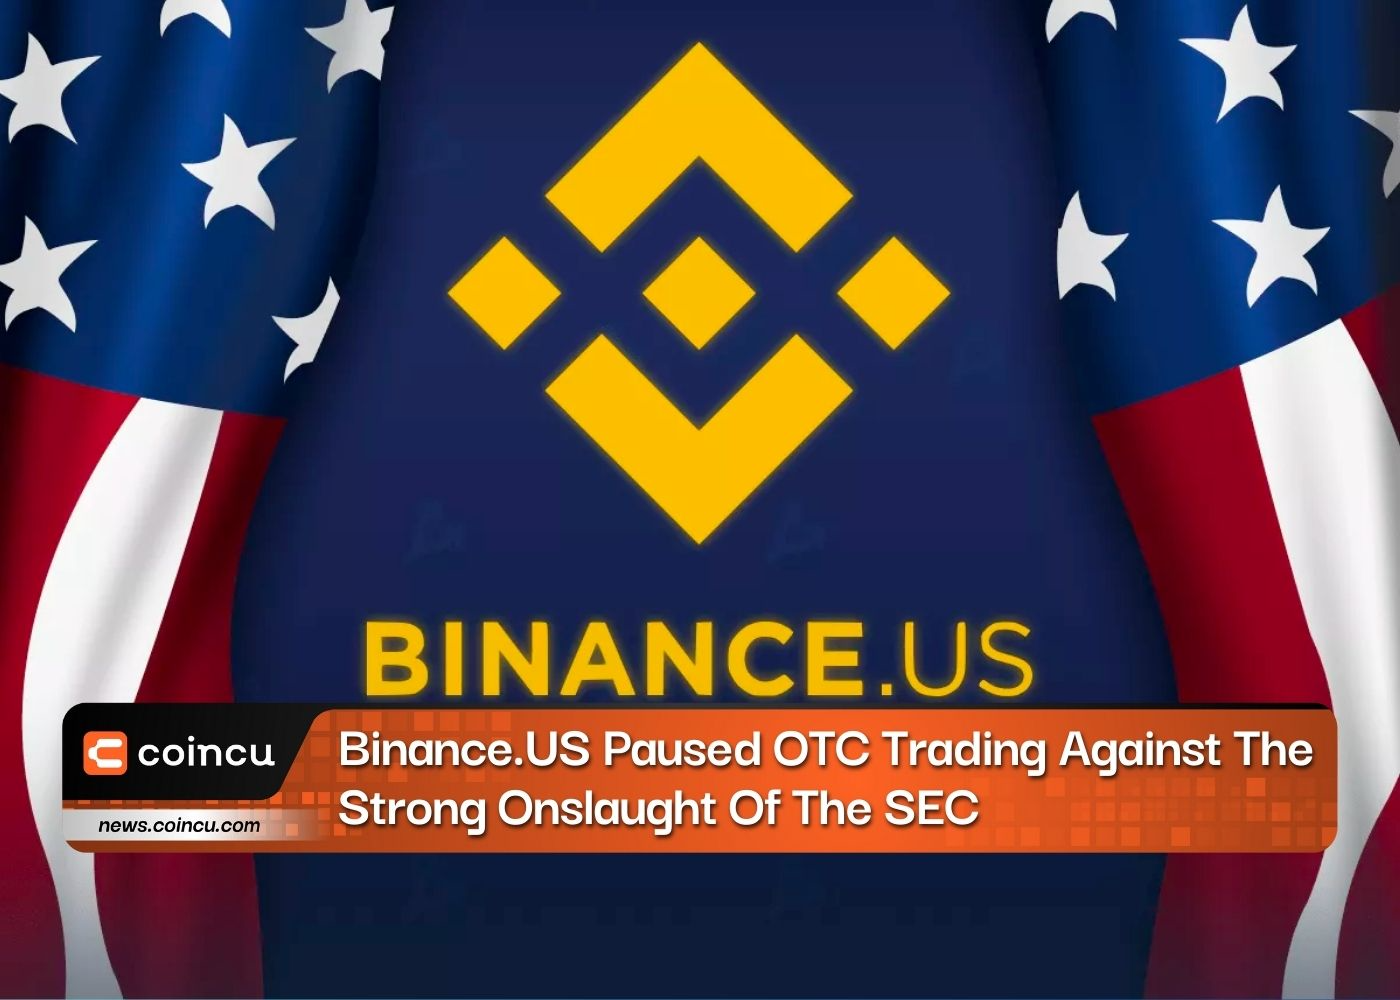 Binance.US Paused OTC Trading Against The Strong Onslaught Of The SEC